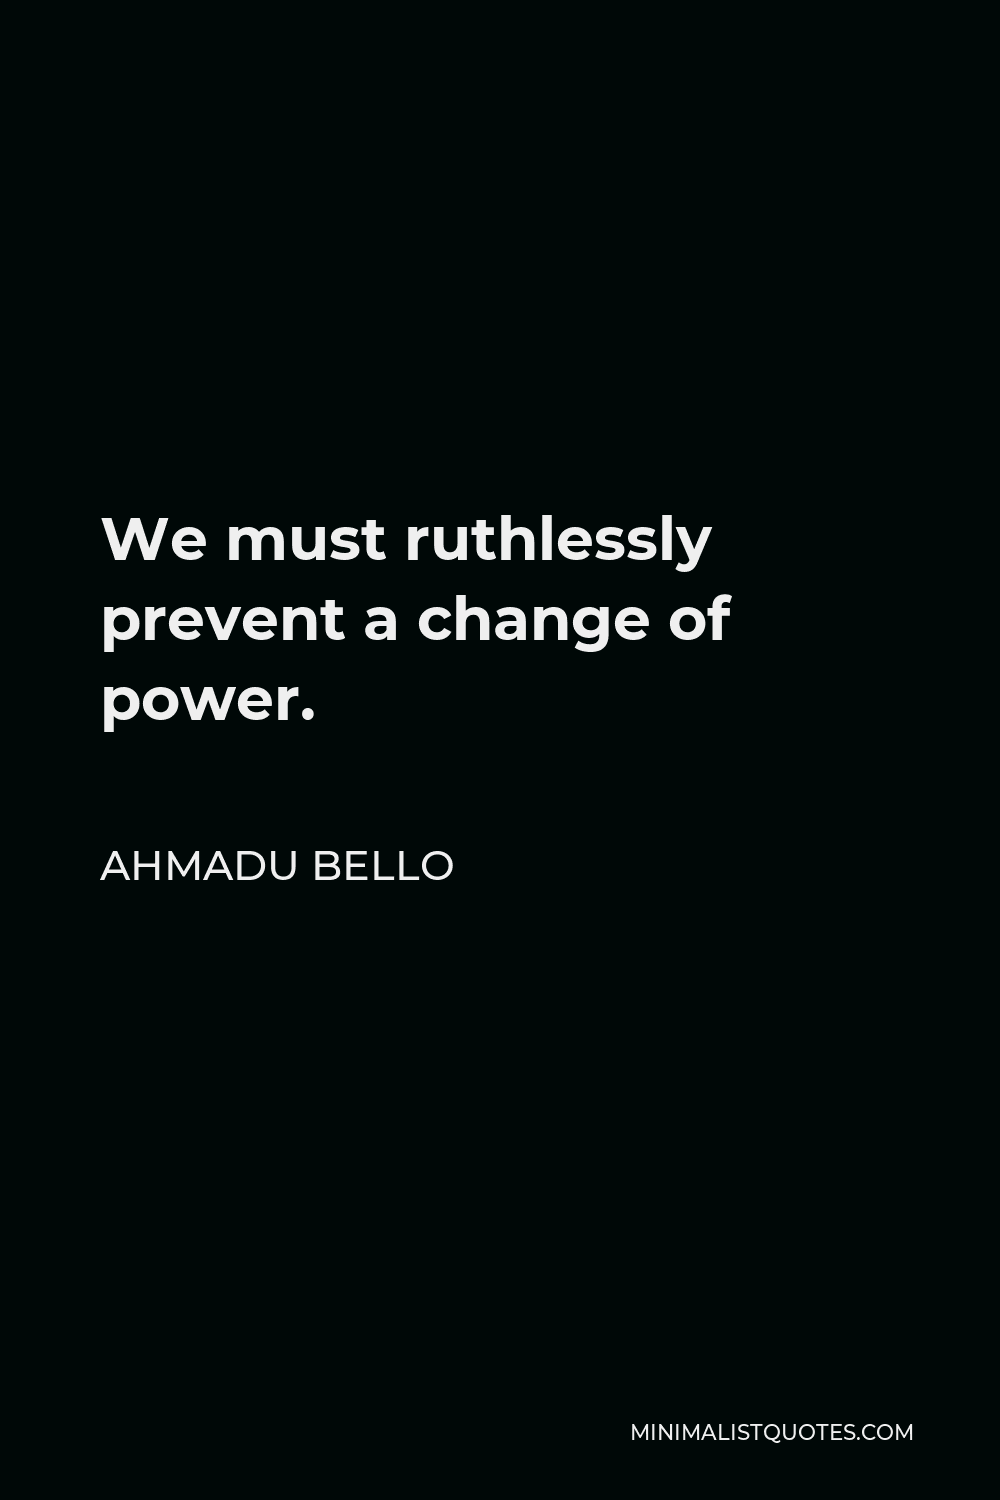 Ahmadu Bello Quote - We must ruthlessly prevent a change of power.